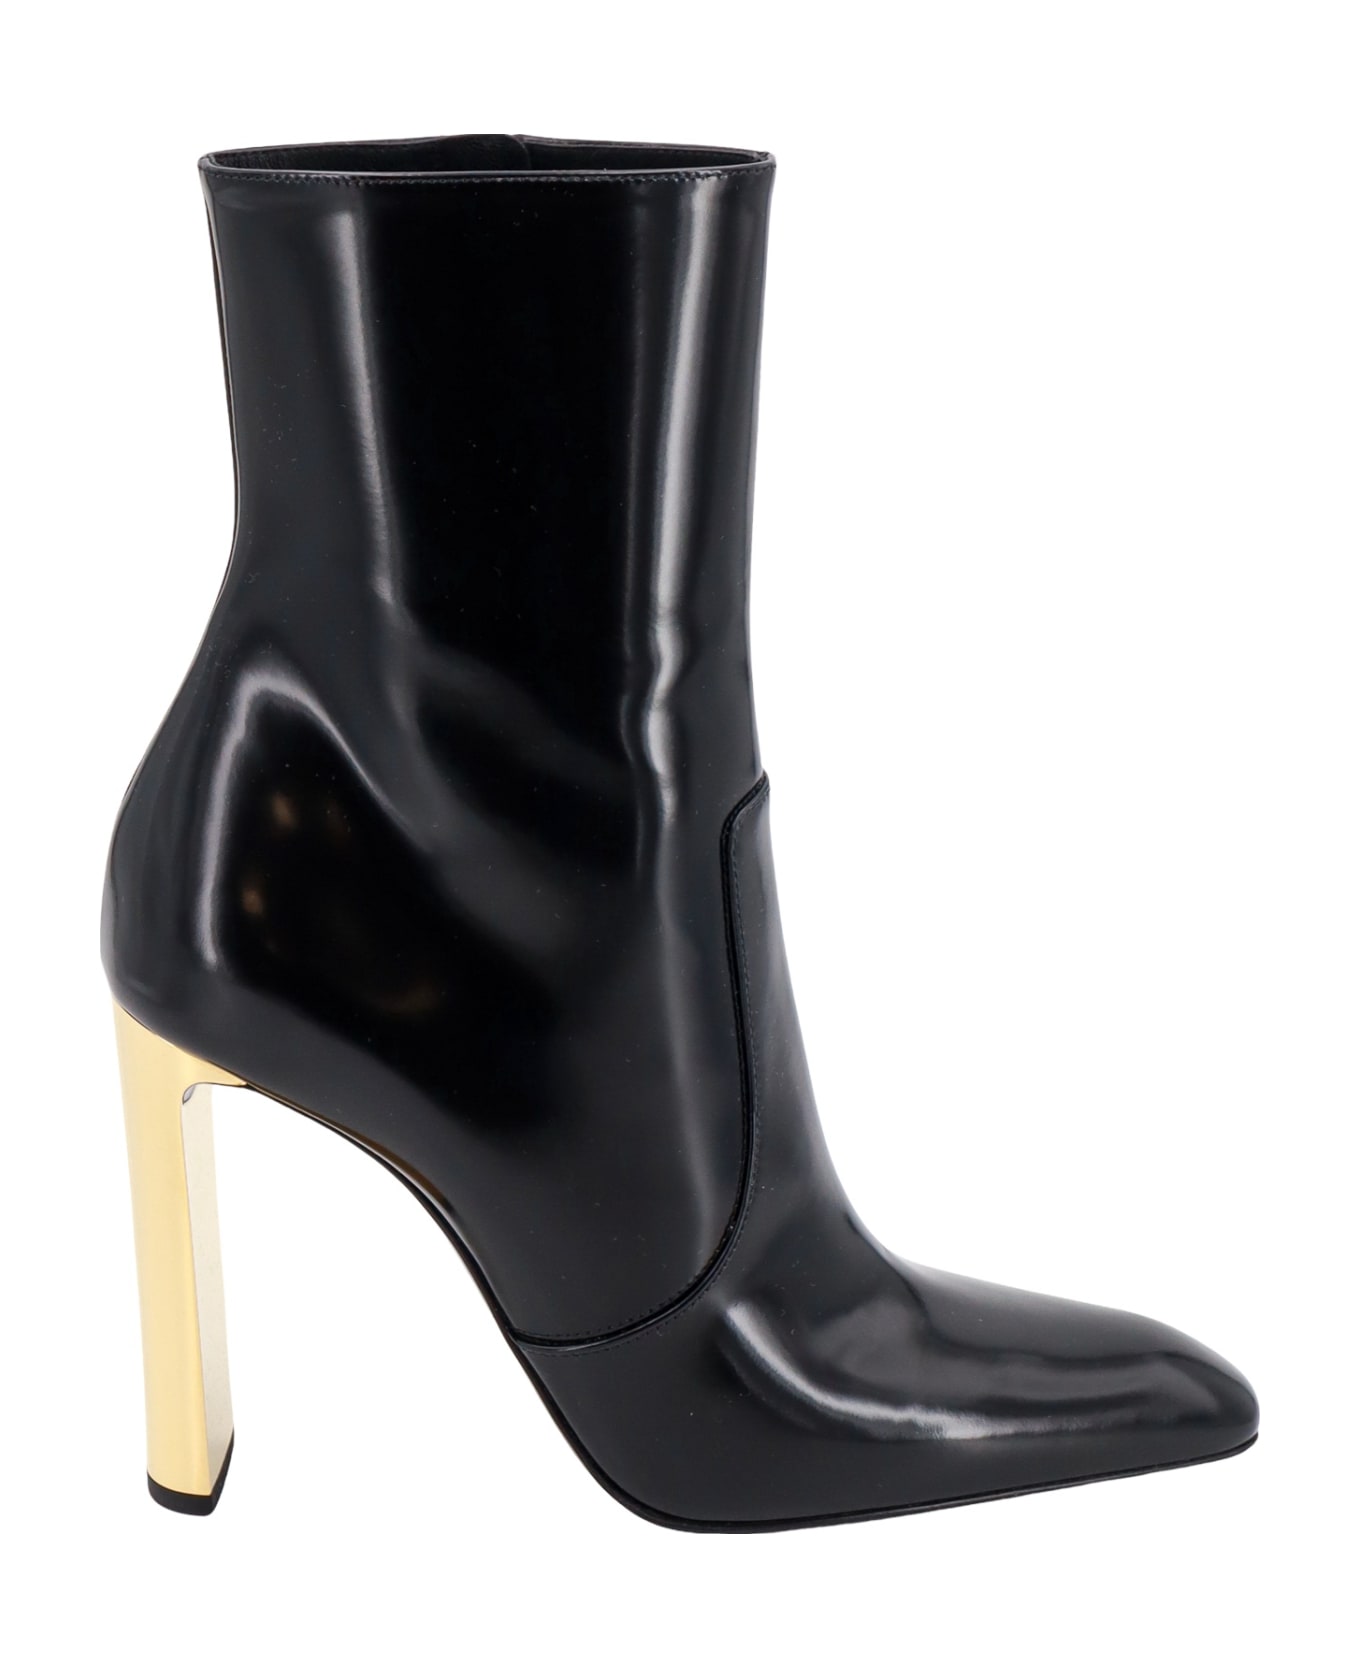 Saint Laurent Ankle Boot In Glazed Leather And Gold Heel - Black